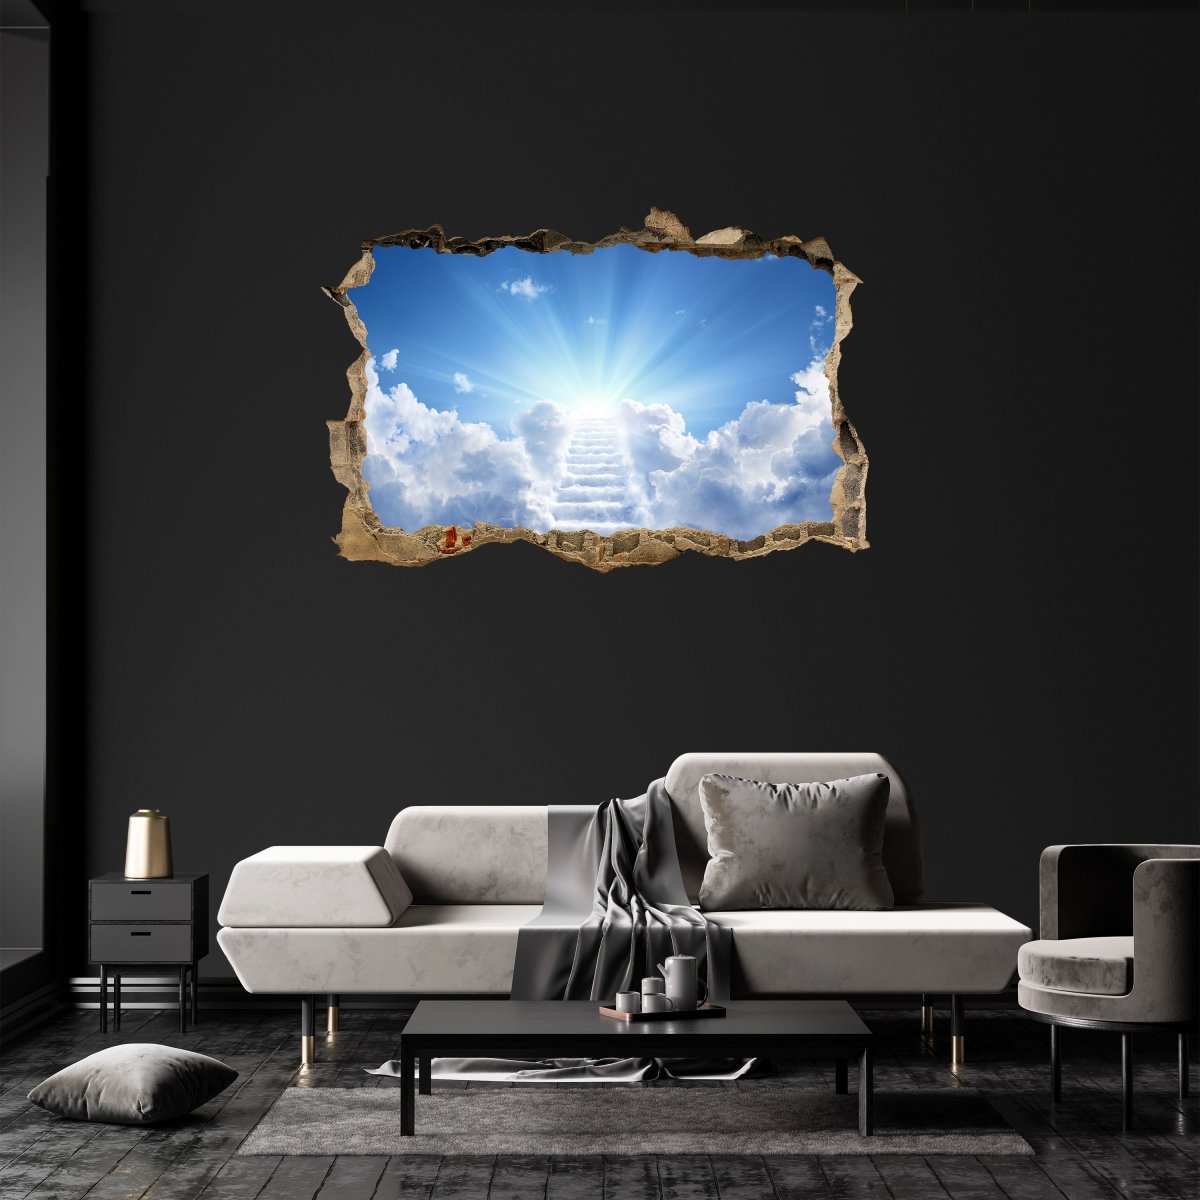 3D wall sticker stairway to heaven, clouds, sun - Wall Decal M1102